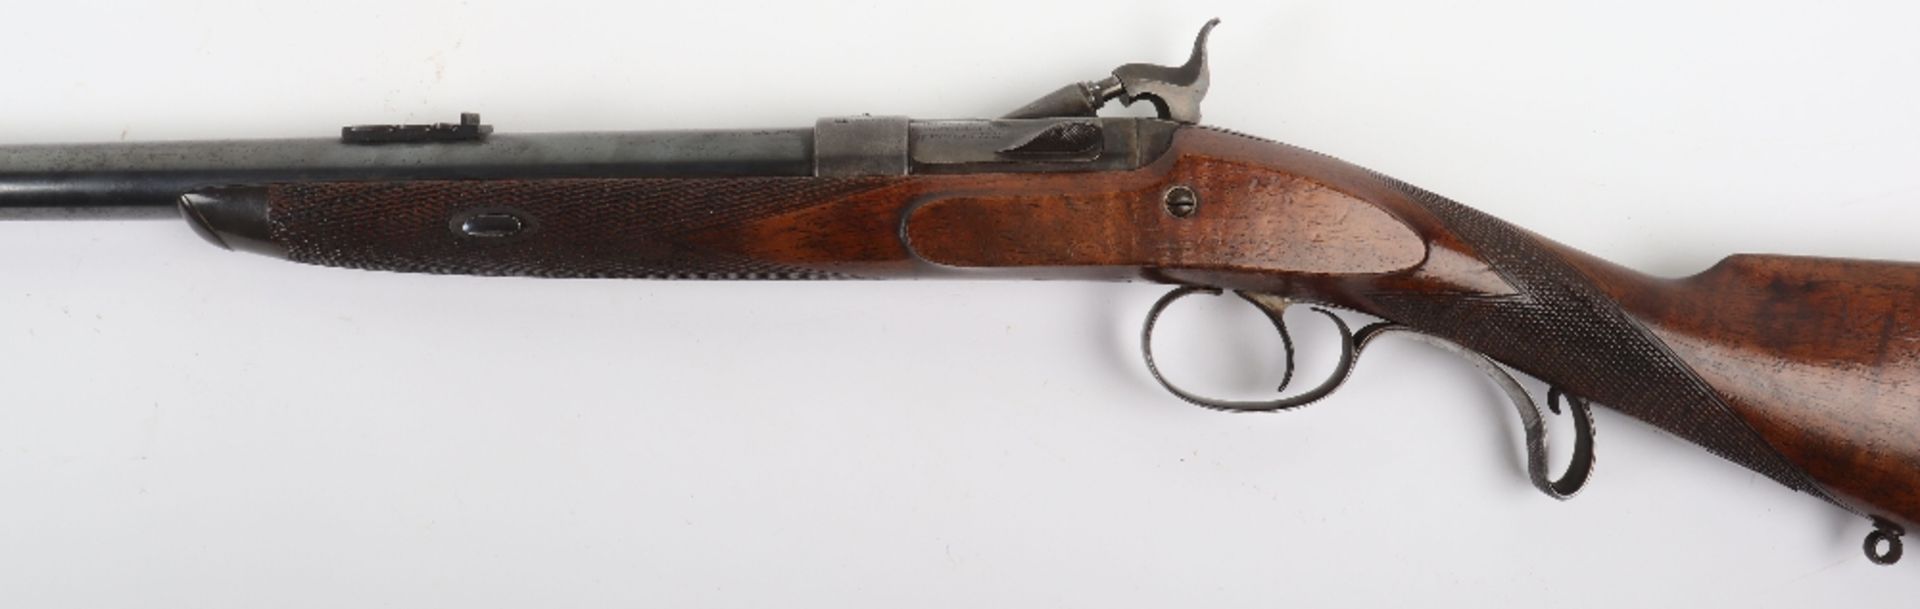 25-Bore Snider Action Breech Loading Sporting Rifle by Reilly No. 15227 - Image 12 of 14